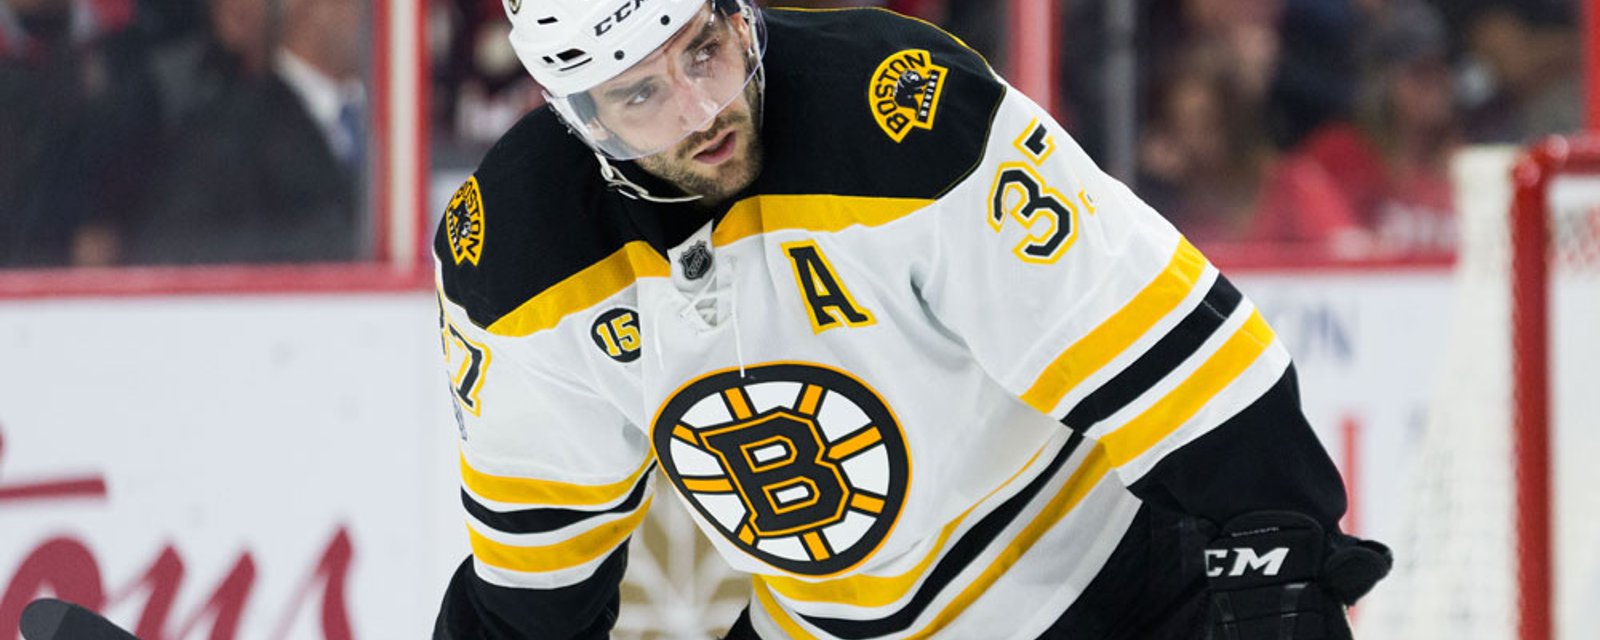 Breaking: Patrice Bergeron may have suffered a problematic injury